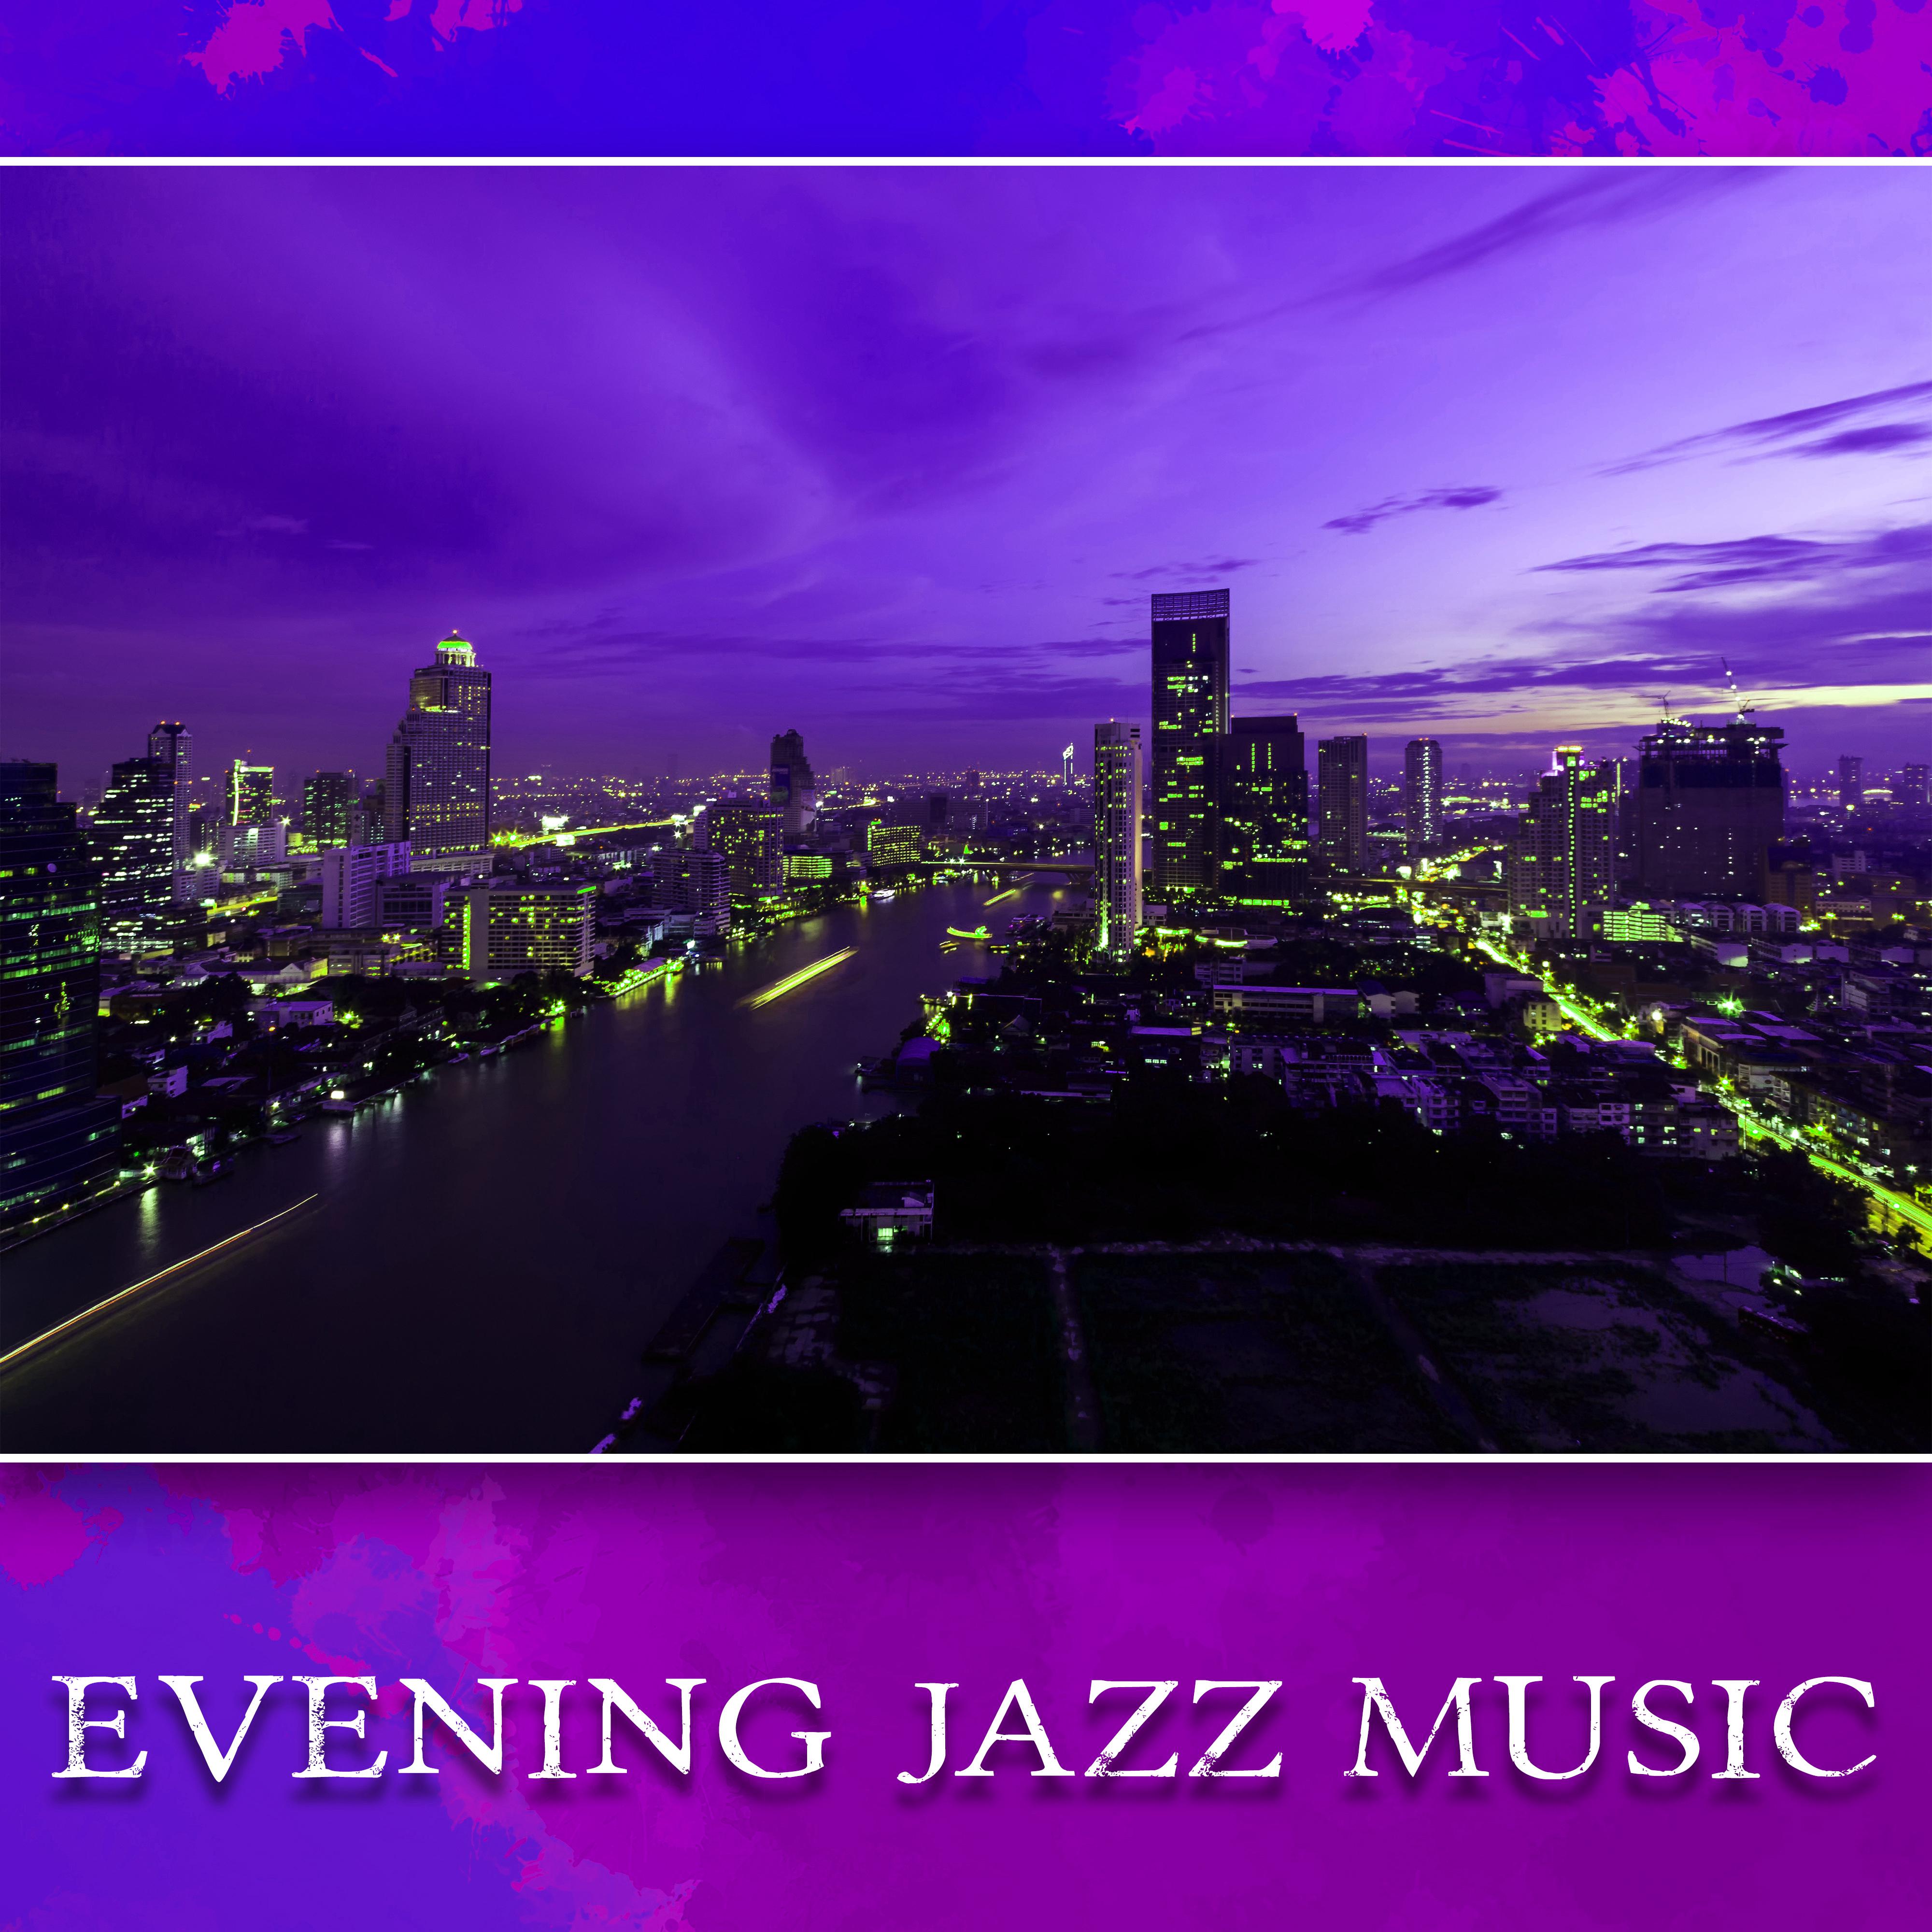 Evening Jazz Music – Smooth Jazz Night, Calming Sounds to Relax, Easy Listening Piano Jazz